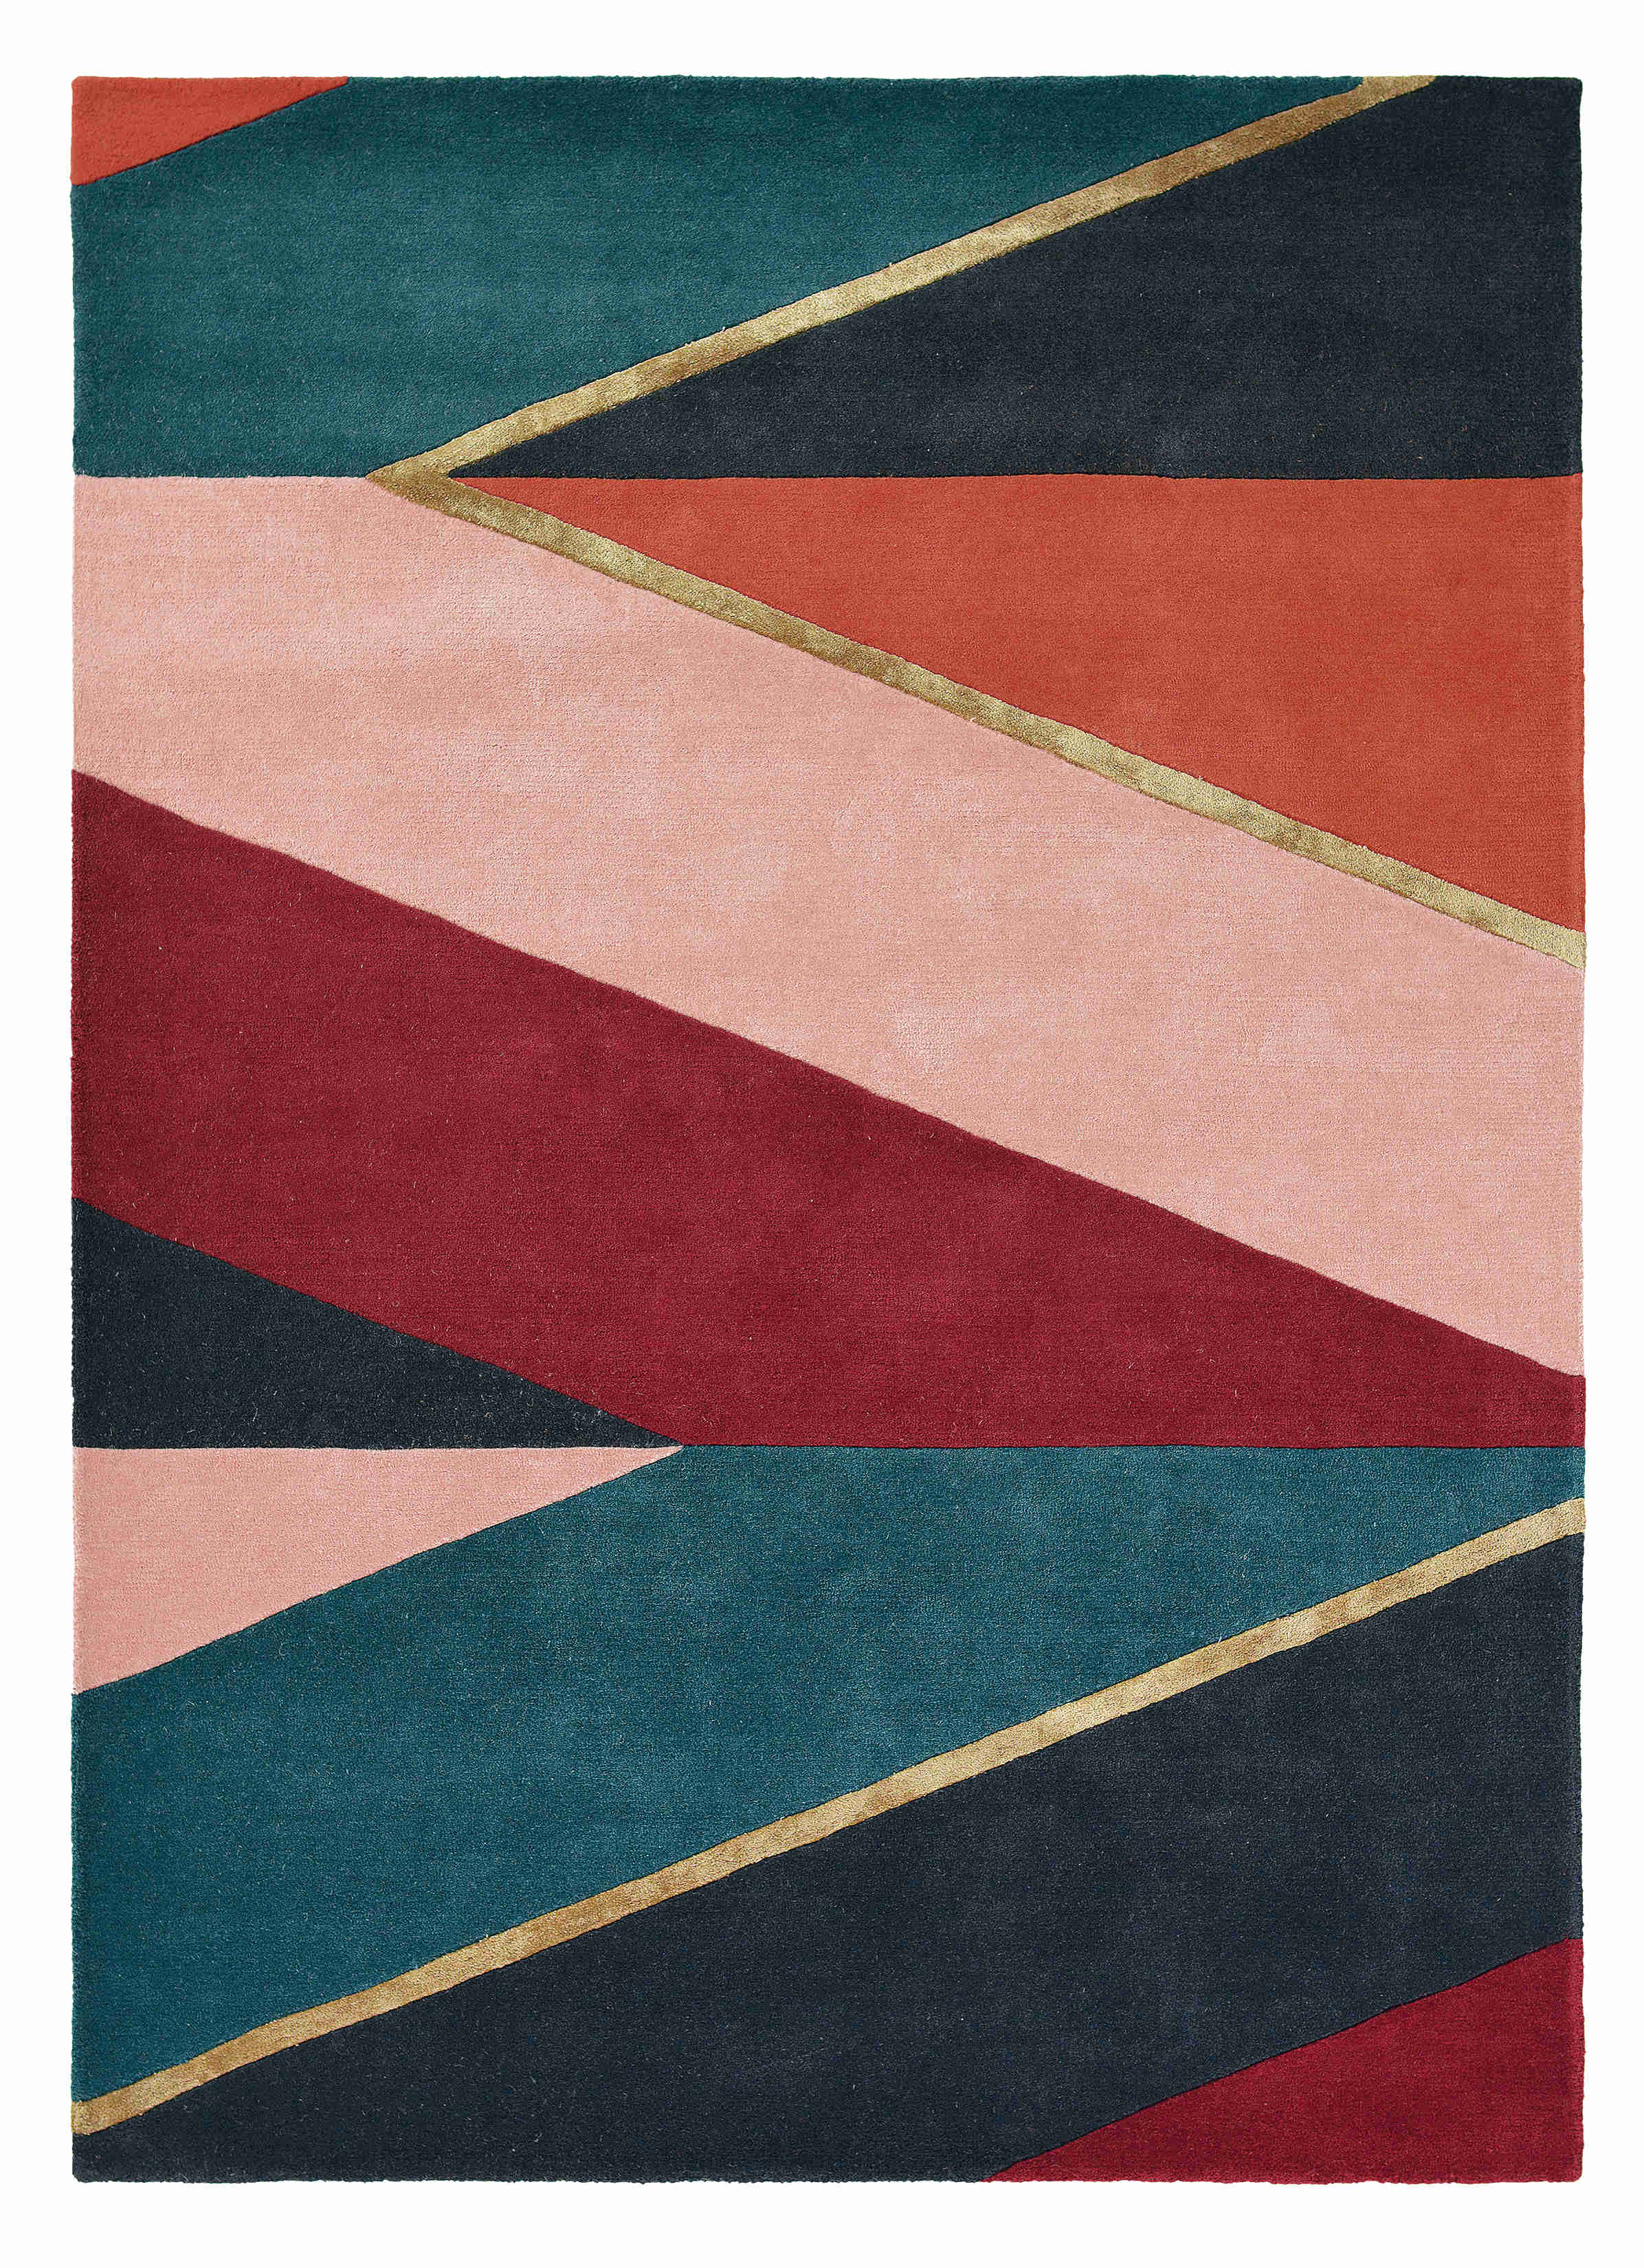 Rectangular rug with geometric stripe pattern in green, coral, nude and red. Gold details.